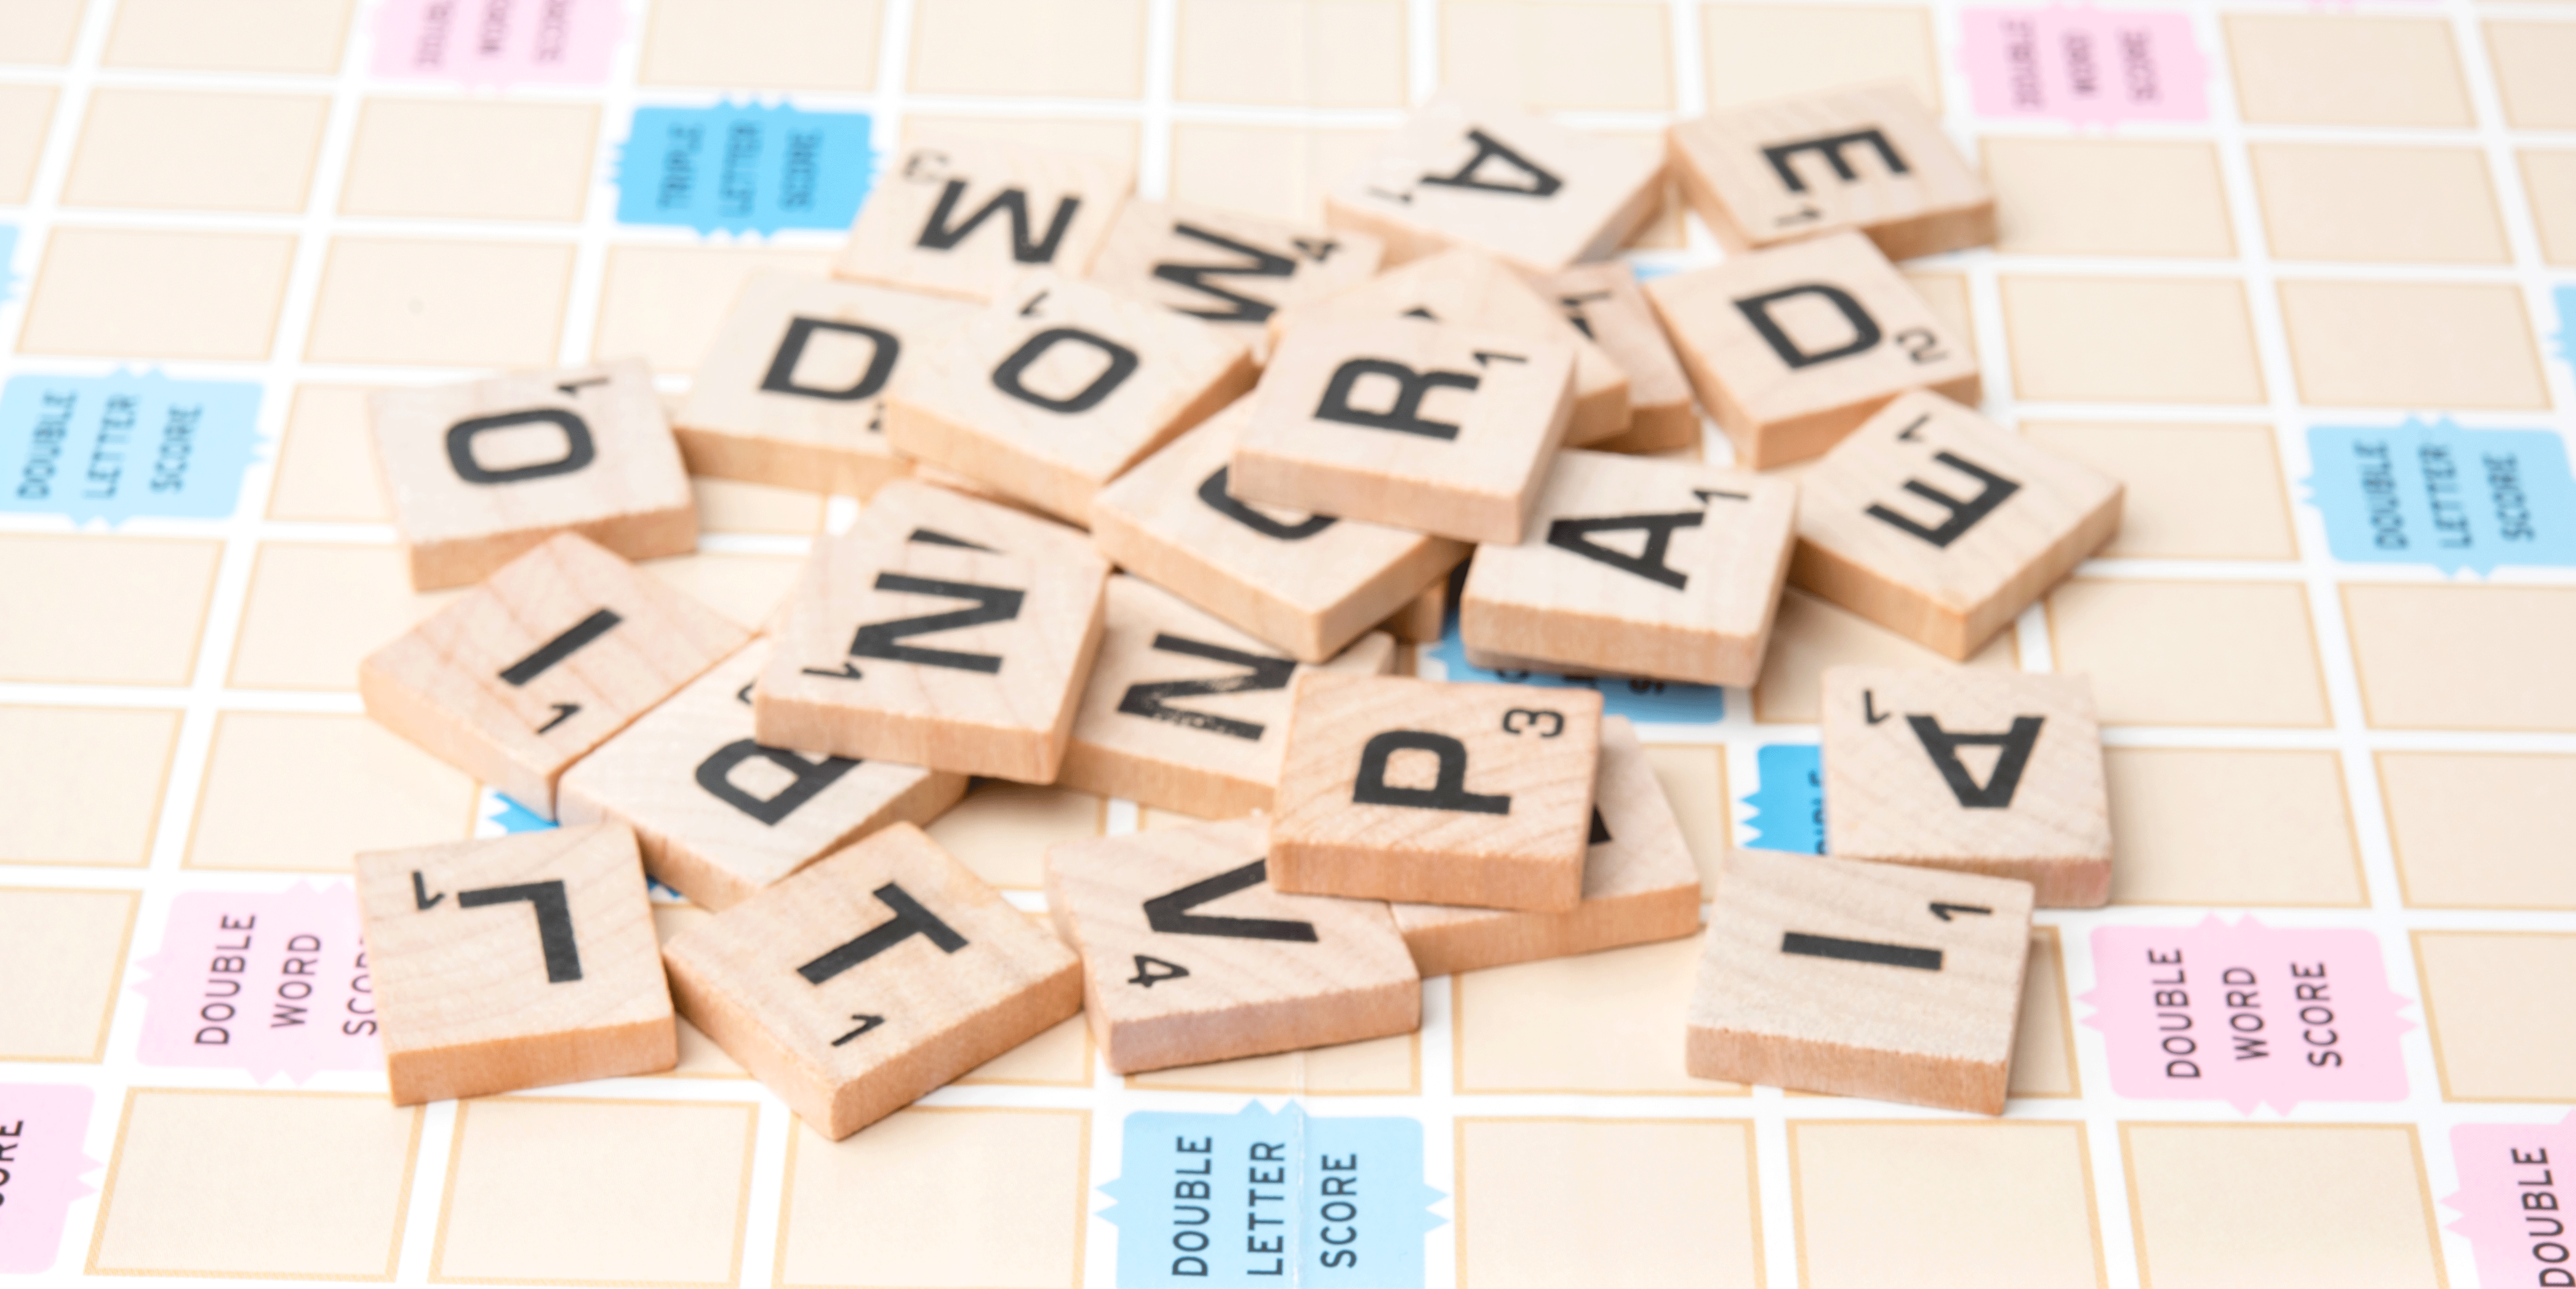 Bananagrams Classic Edition Puzzle game Scrabble Game For Children Toys Kid Gift 